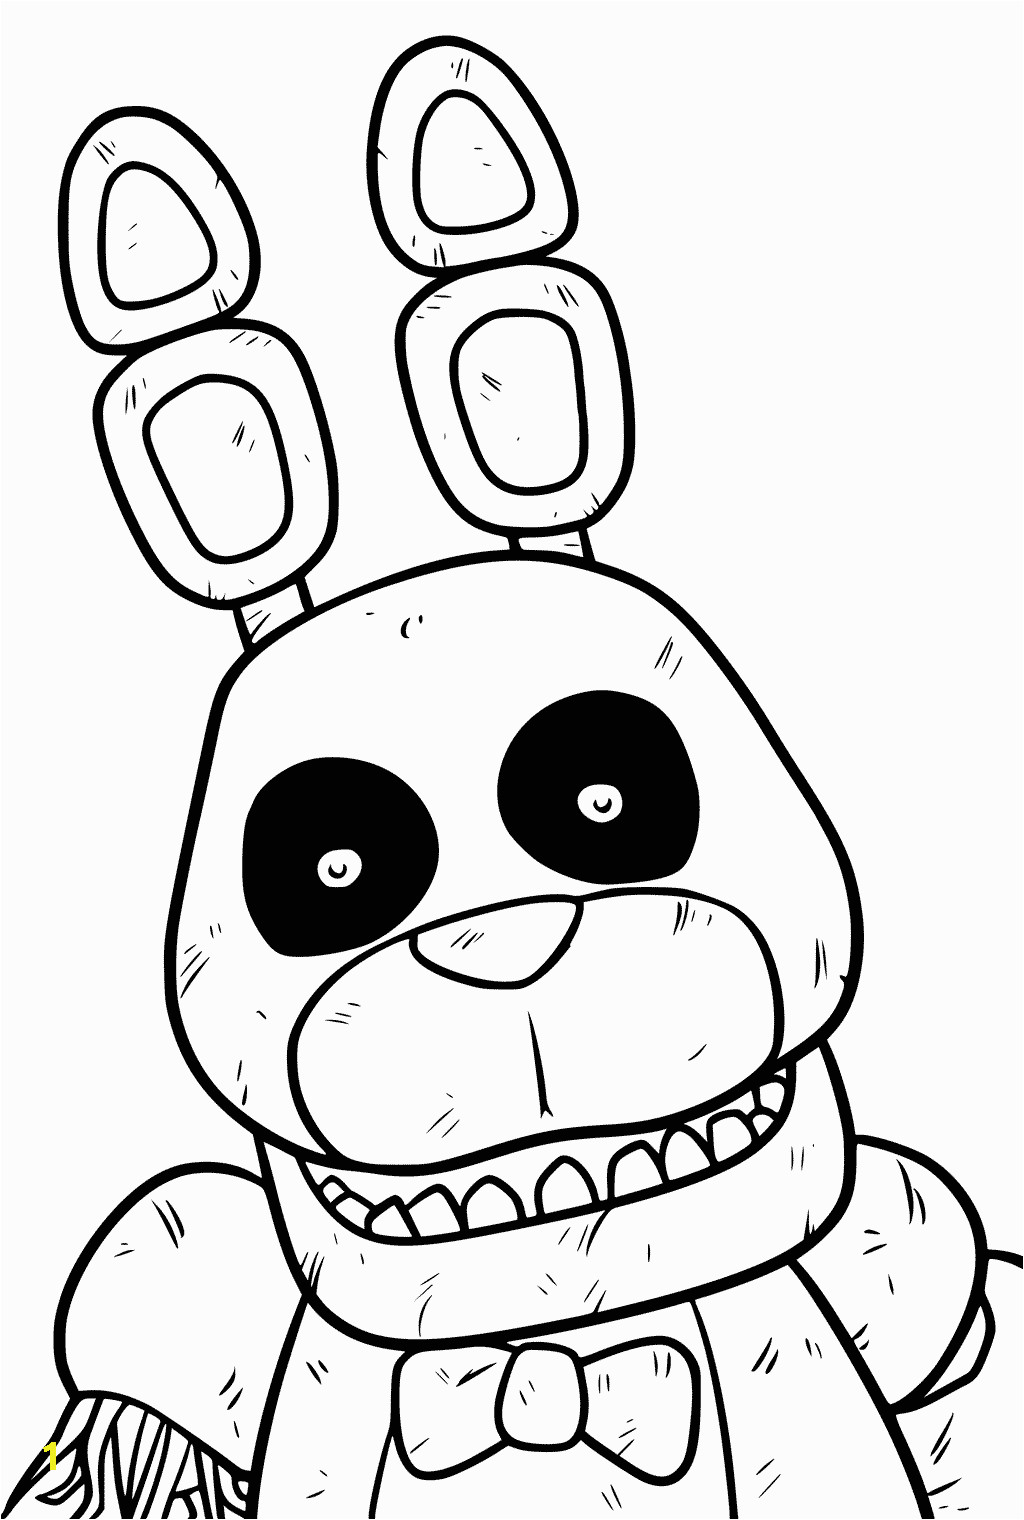 Five Nights at Freddy S Bonnie Coloring Pages toy Bonnie Coloring Page at Getcolorings